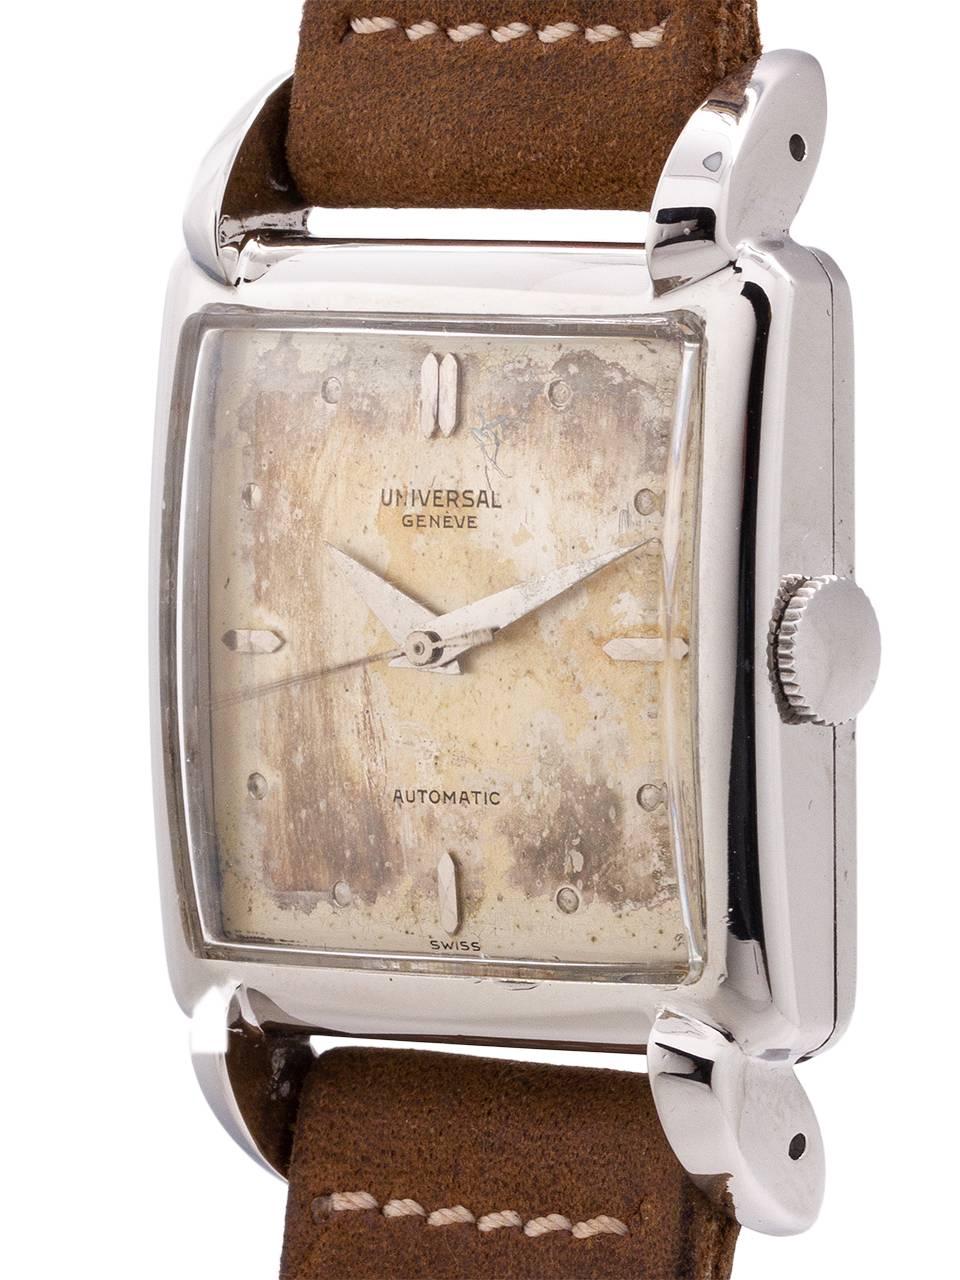 
A great looking Universal Geneve stainless steel oversize 30 X 43 dress model circa 1950’s. Large for the era, with beefy design domed shaped case with prominent horn shaped lugs. With original and drastically aged silver dial with steel hour